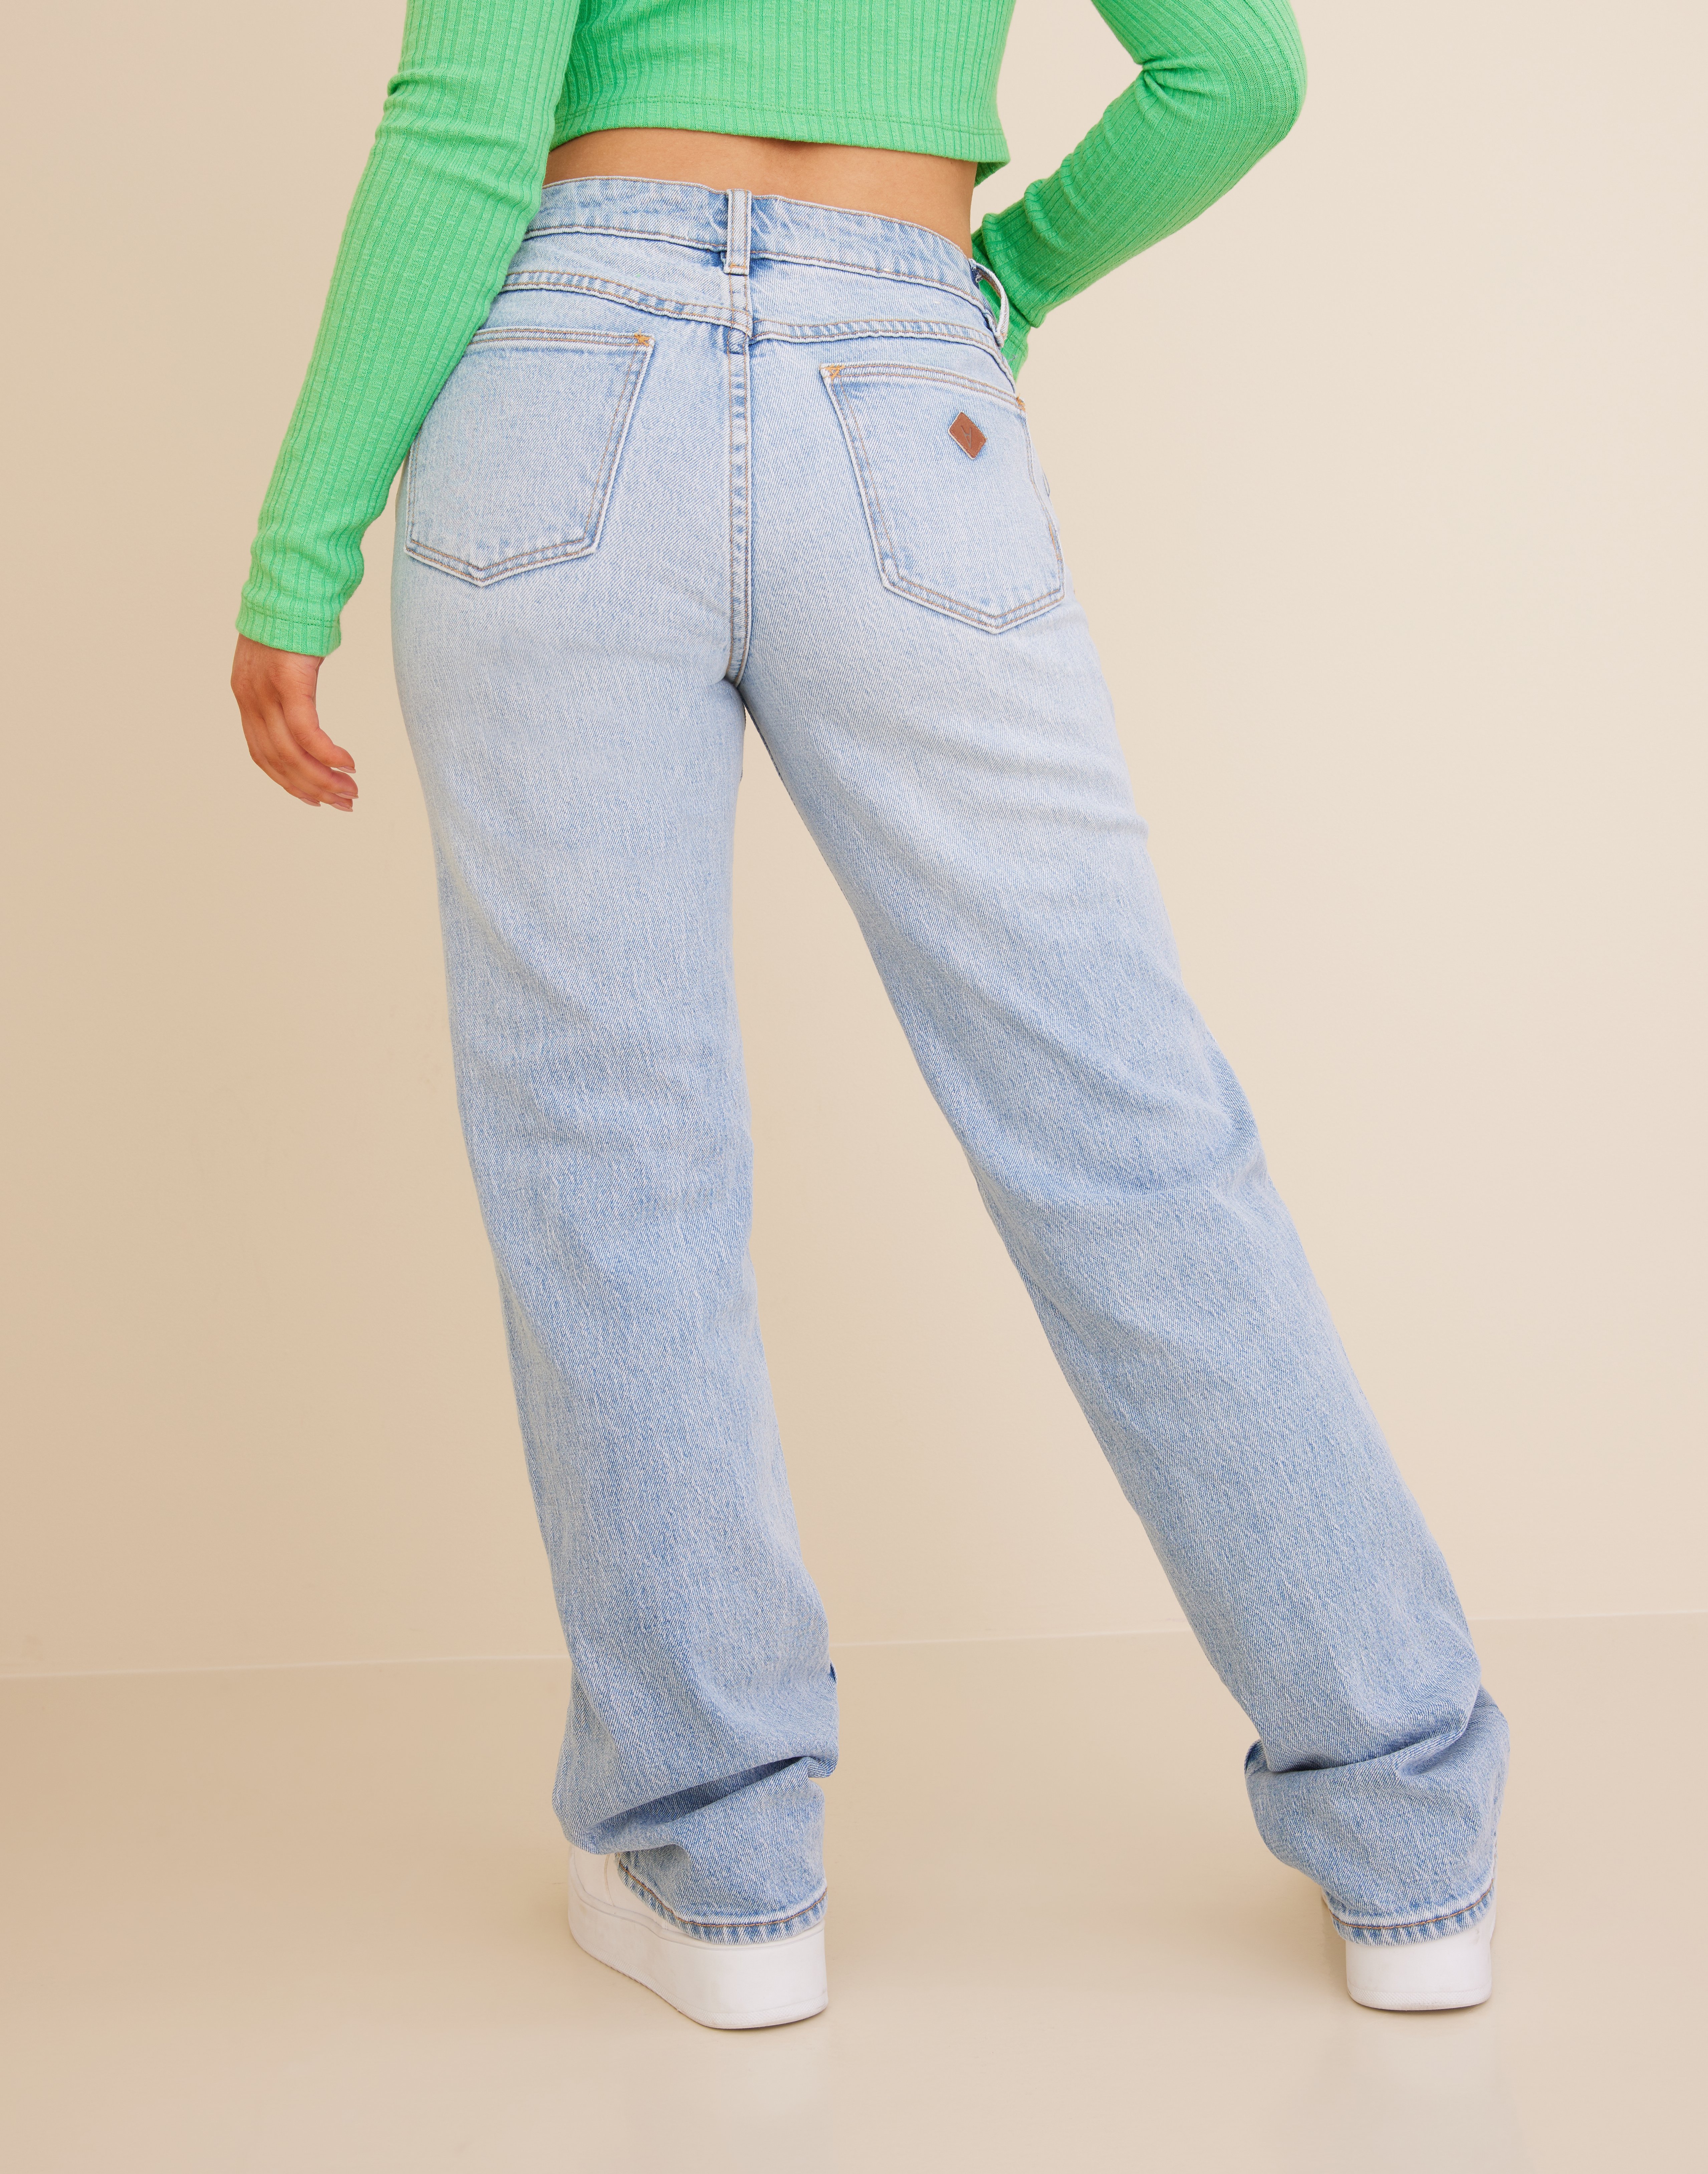 Abrand Jeans - Straight - A '99 Low Straight Riley - Jeans - Straight